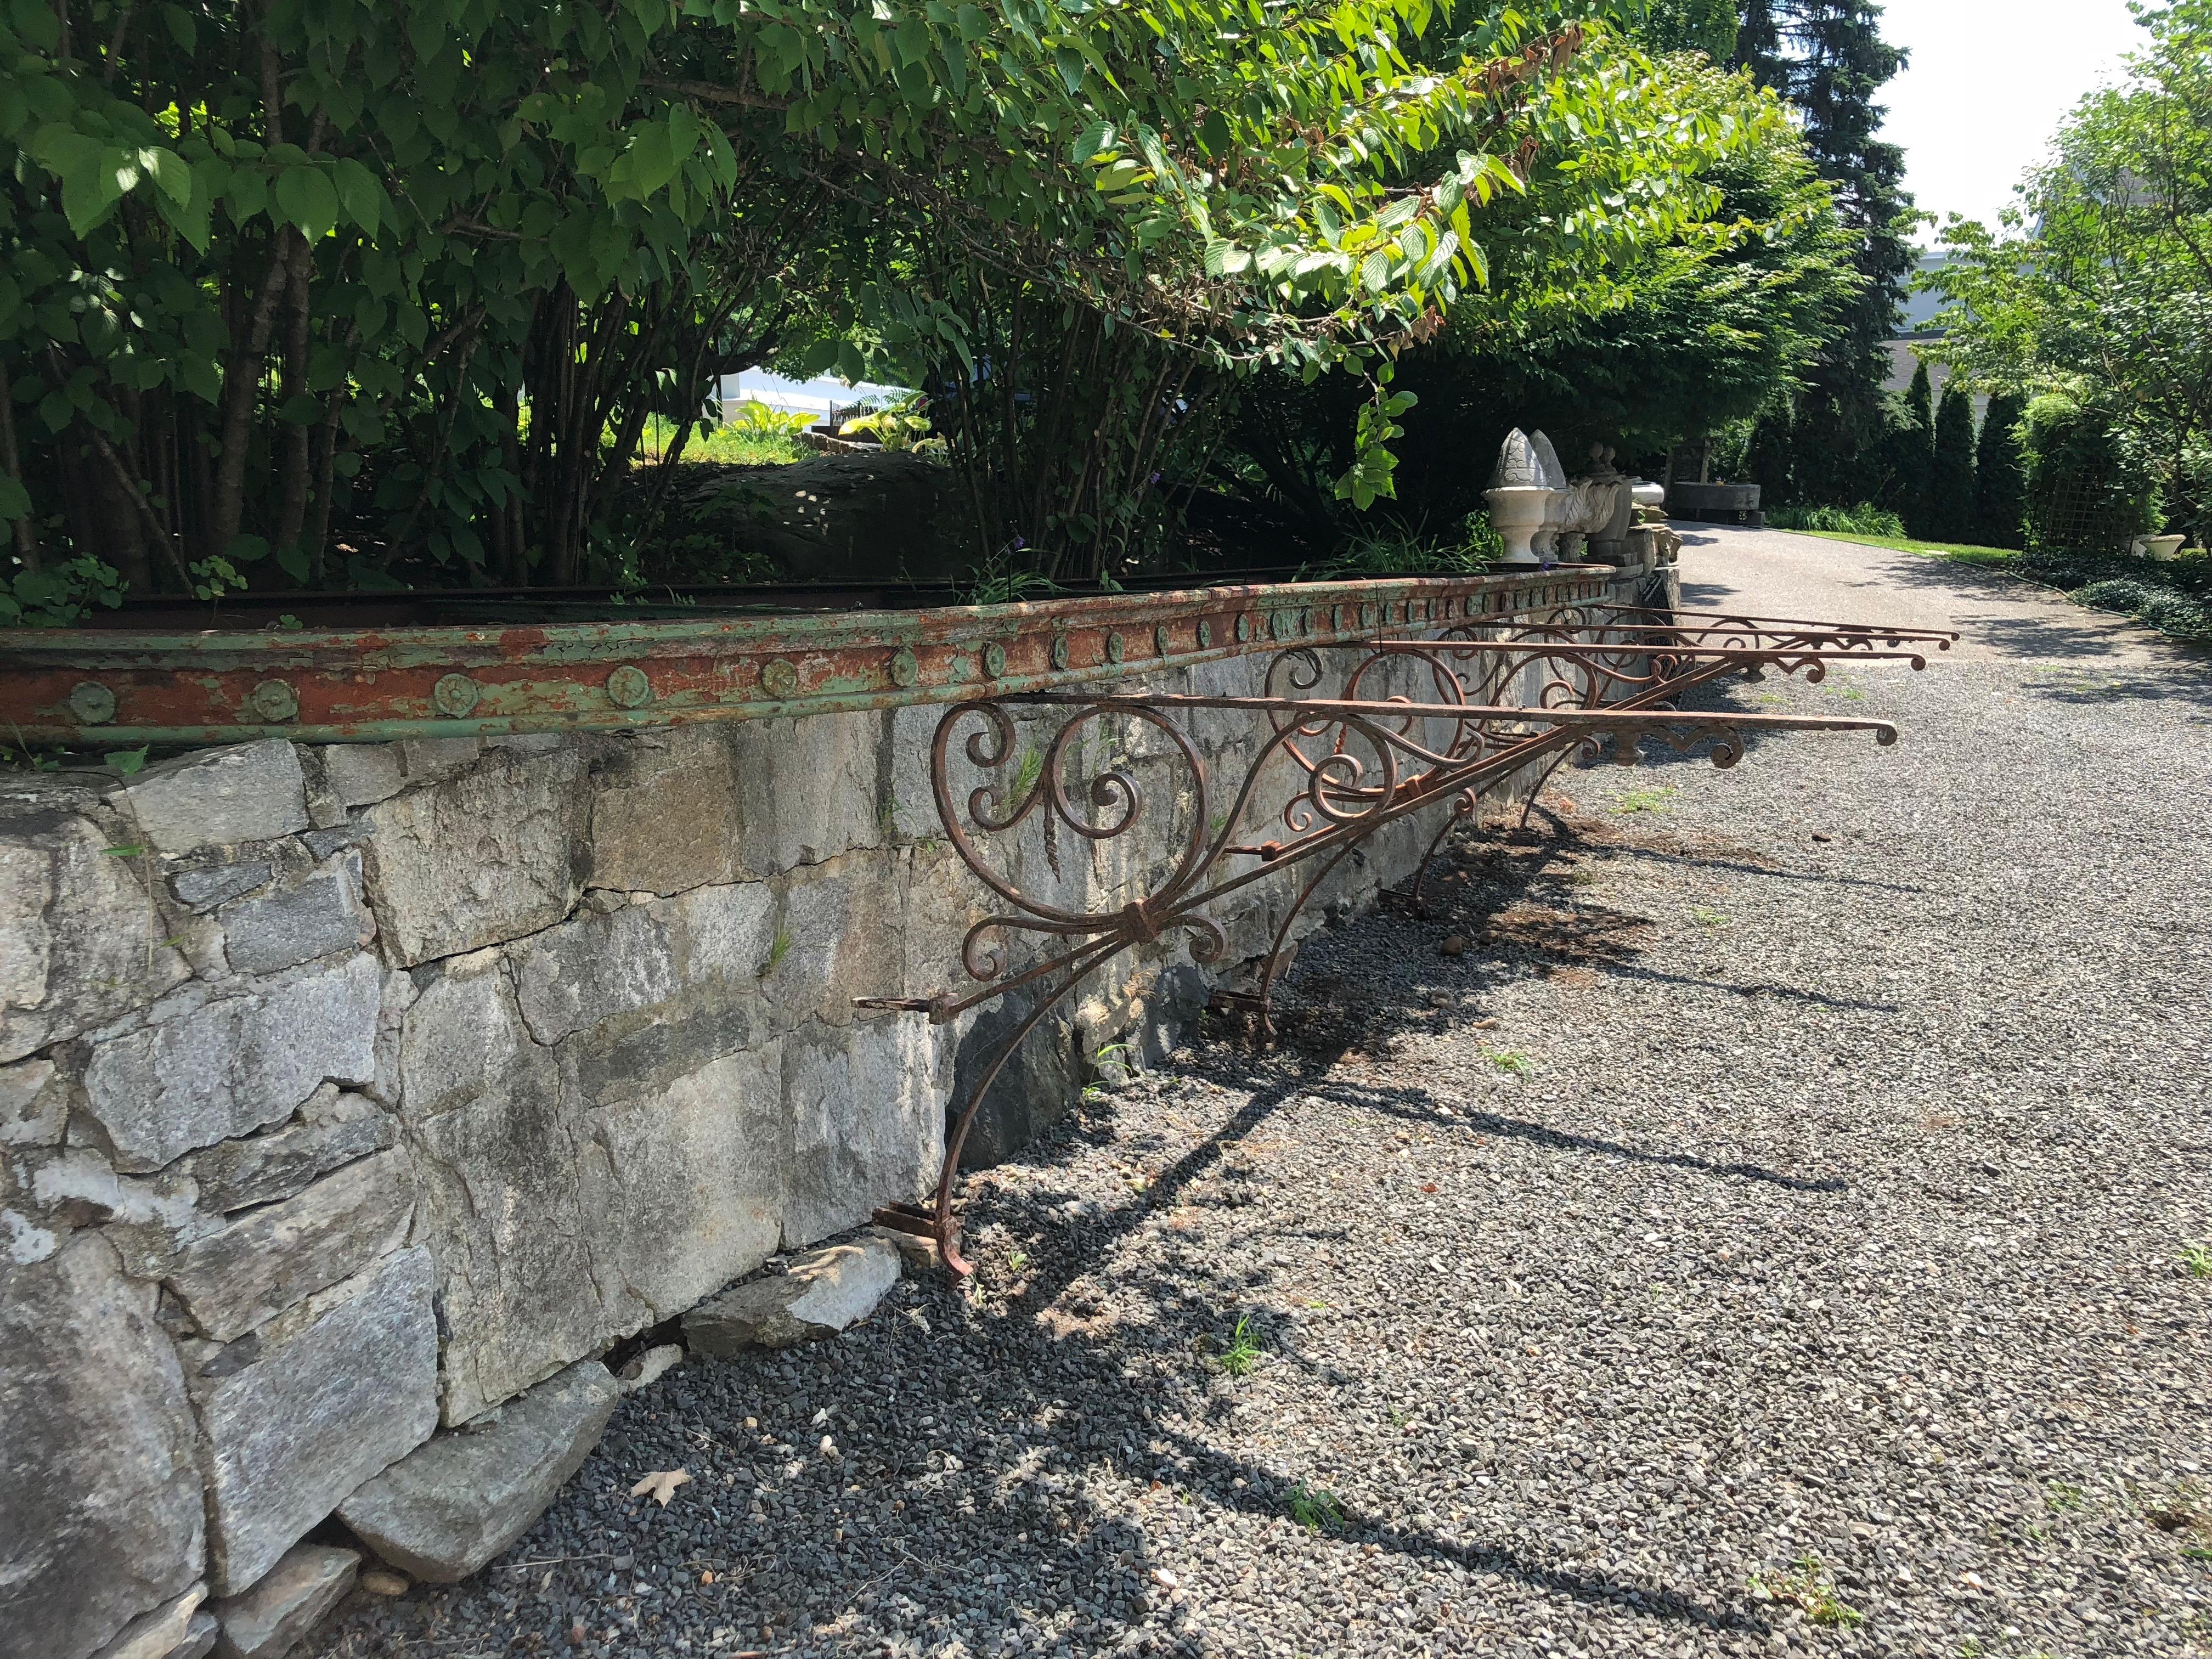 This is truly a very special piece! Sourced from a bistro in Lyon, France, this massive curved-end wrought iron pergola is 24 feet long and features decorative rosettes, its original paint with heavy surface rusting throughout, and four enormous